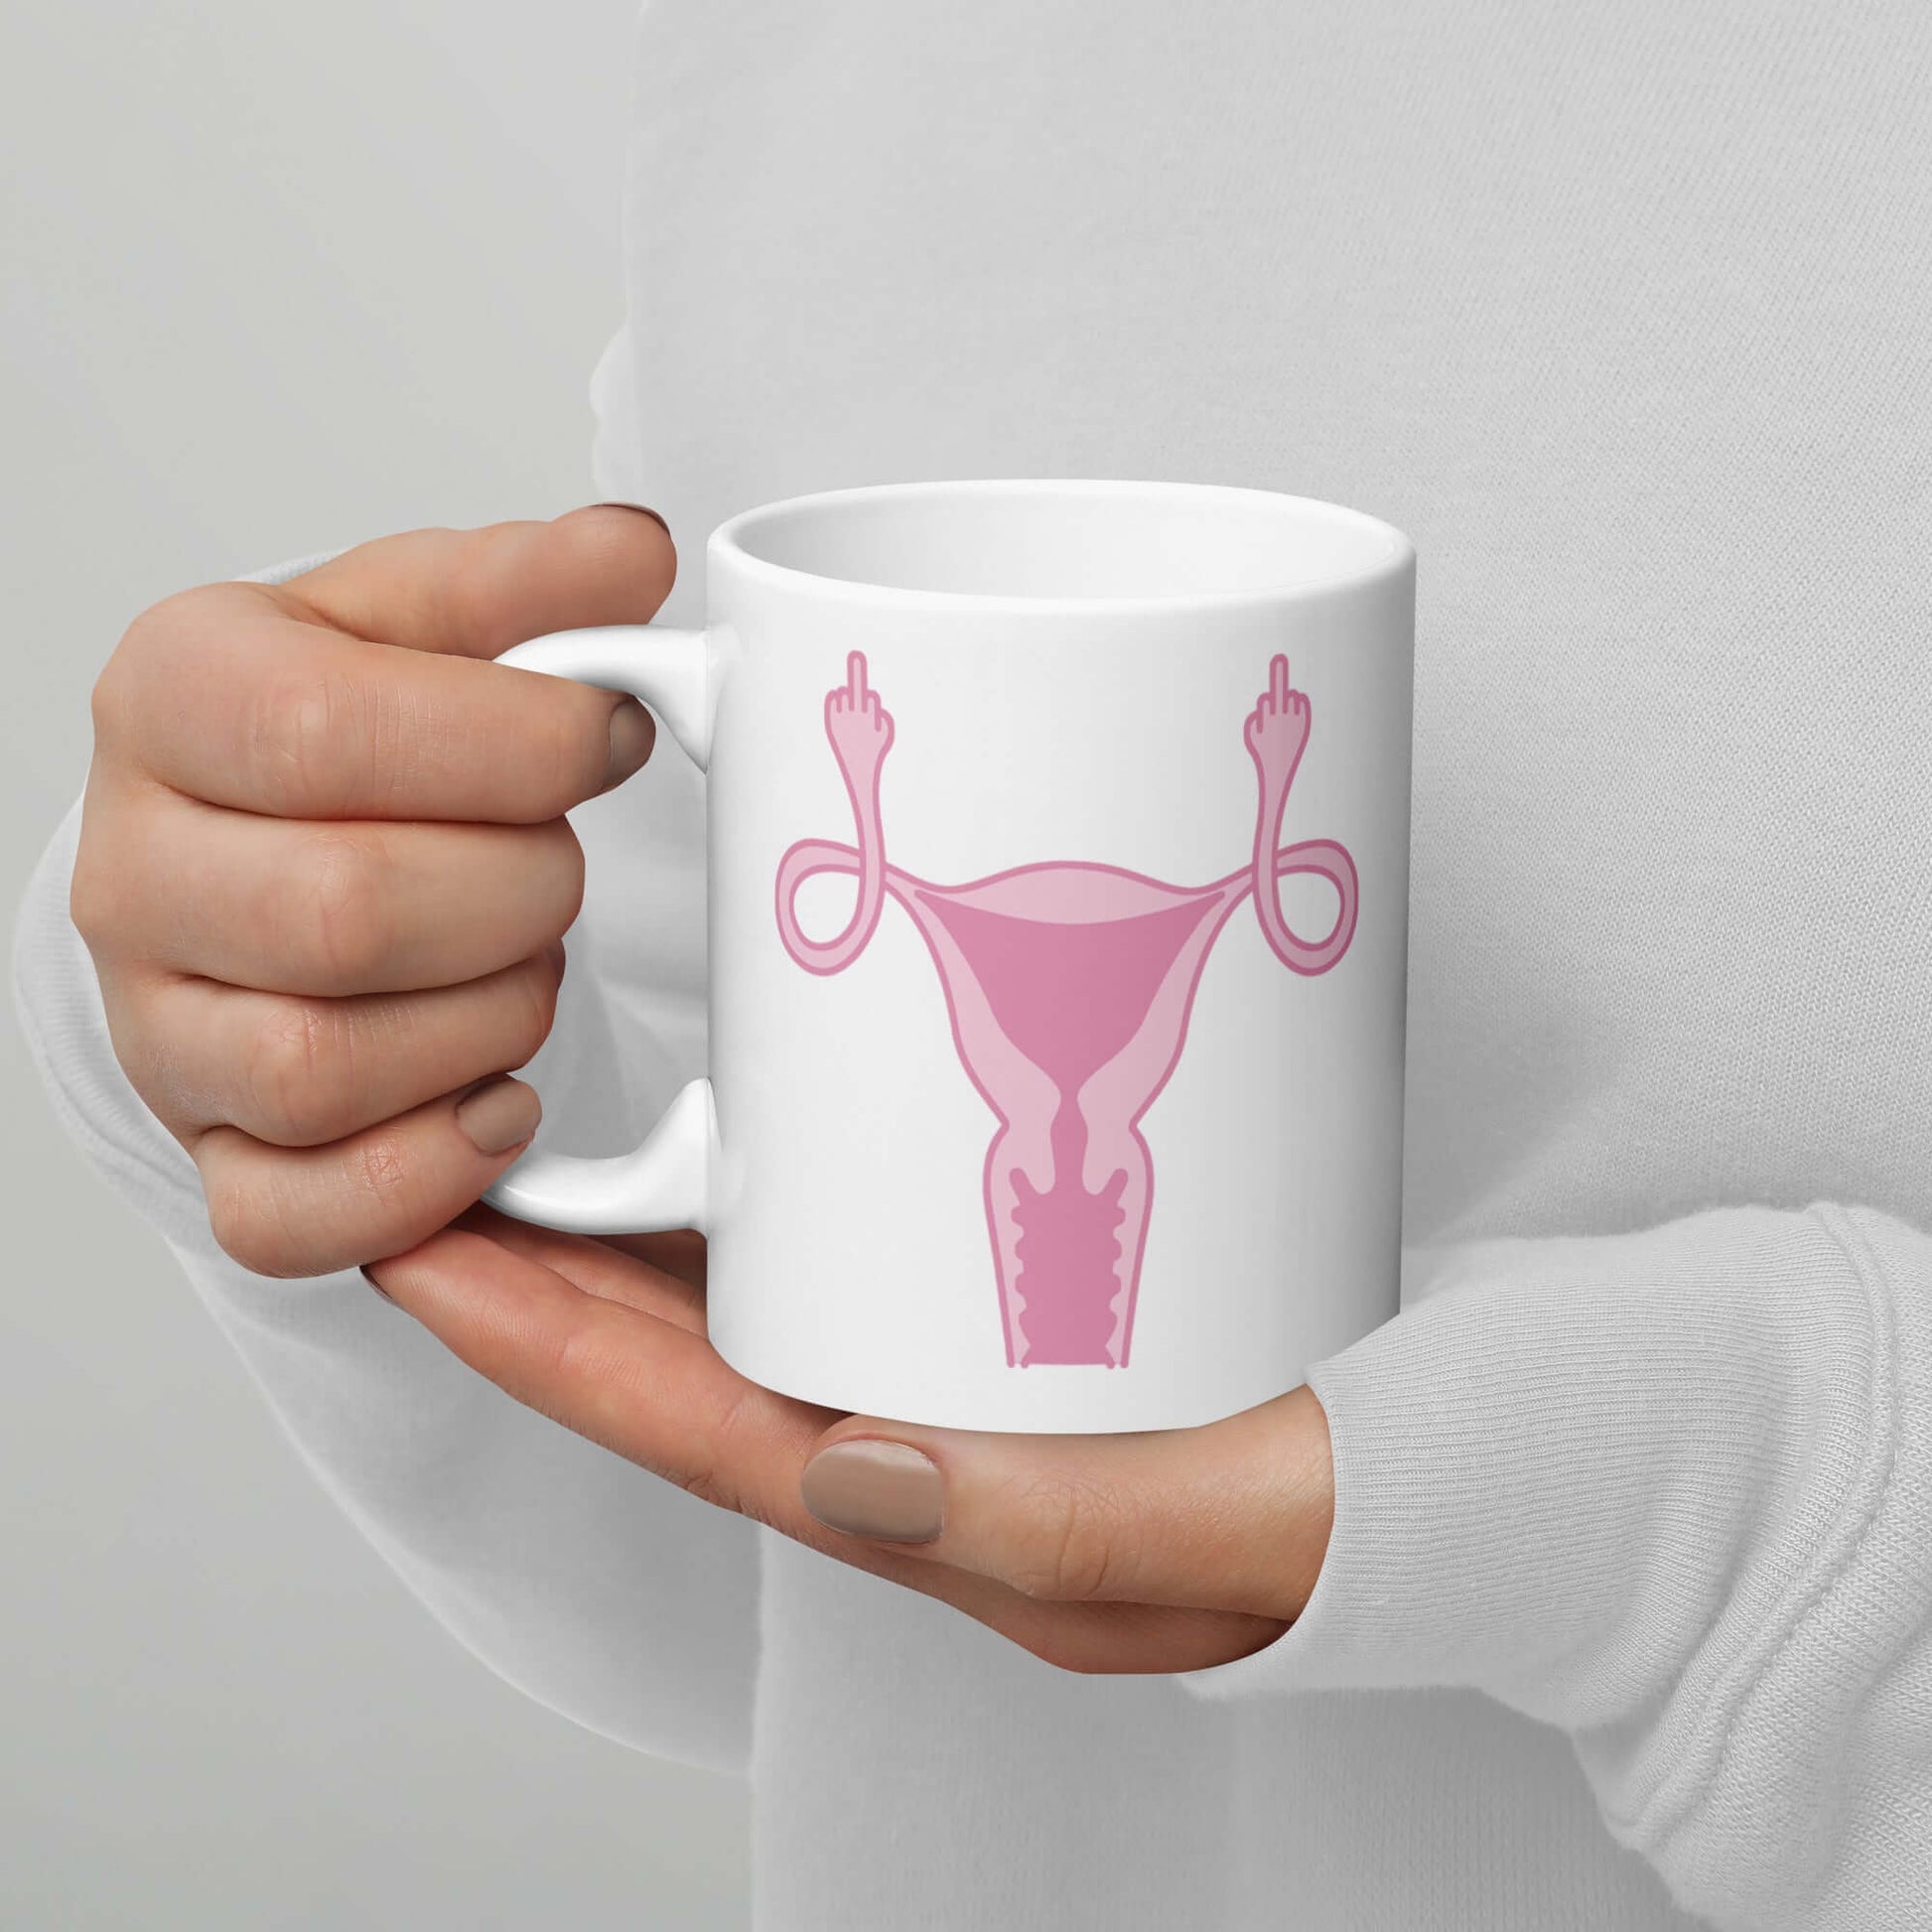 womans hands holding coffee mug with pink uterus flipping middle finger graphic printed on it by witticisms r us dot com